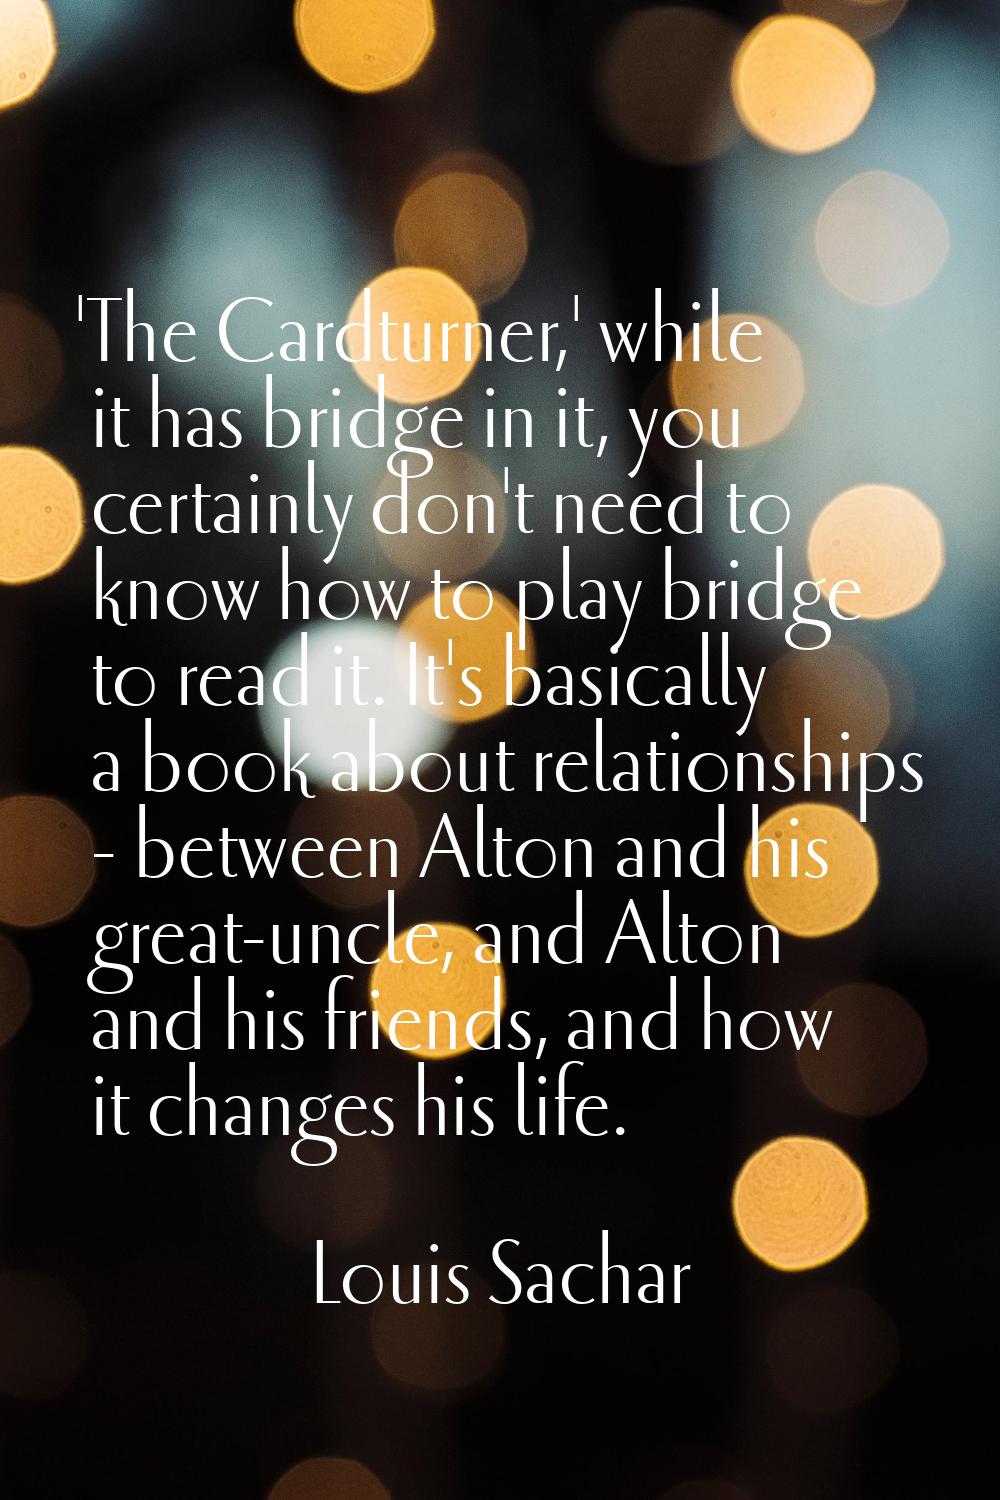 'The Cardturner,' while it has bridge in it, you certainly don't need to know how to play bridge to